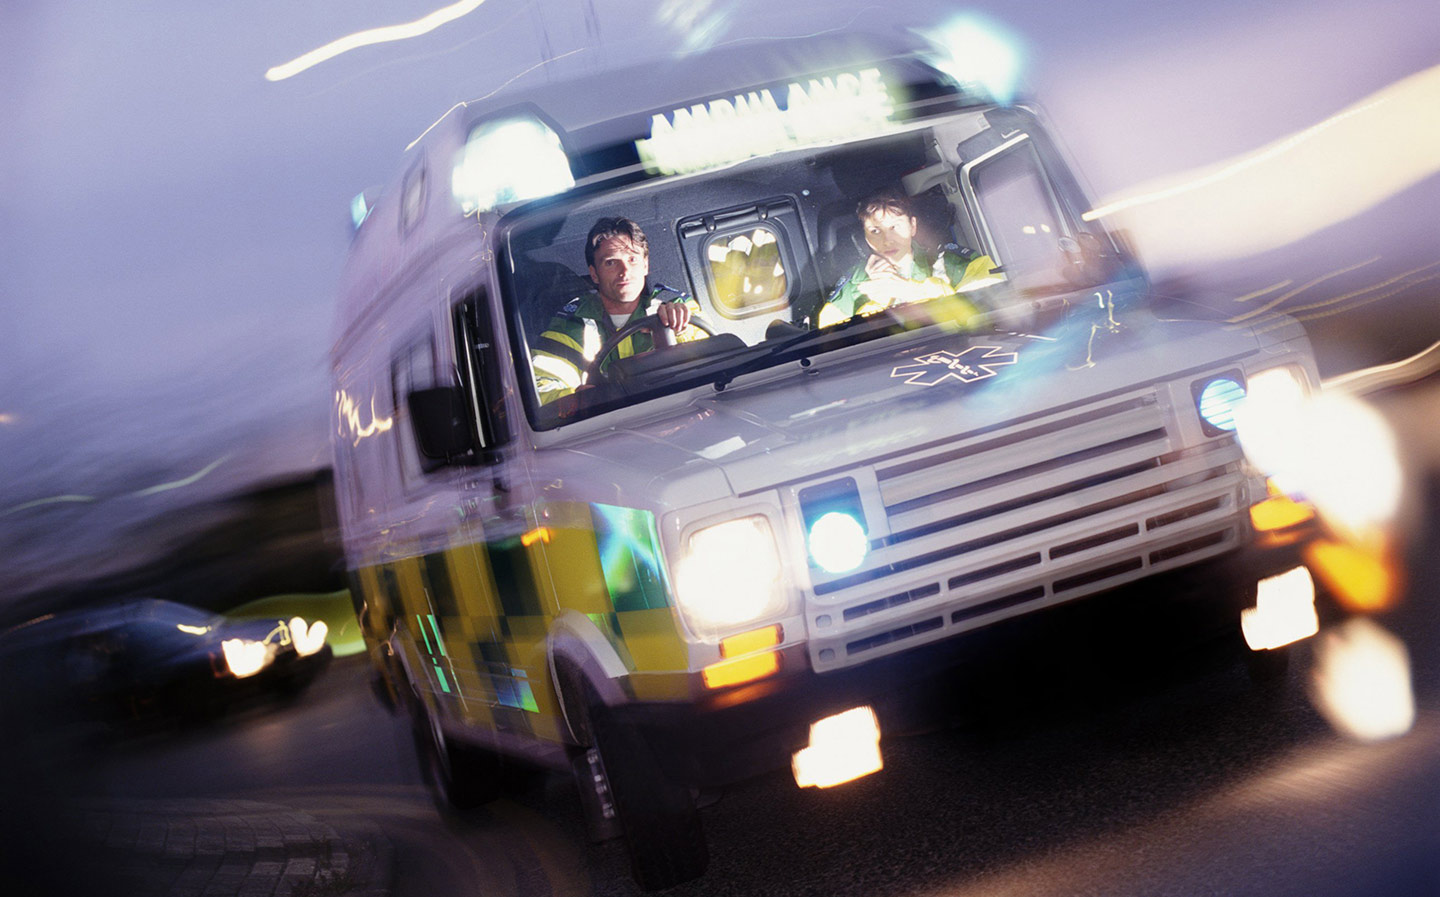 Private ambulance drivers receive "one hour of training" before hitting road at high speed